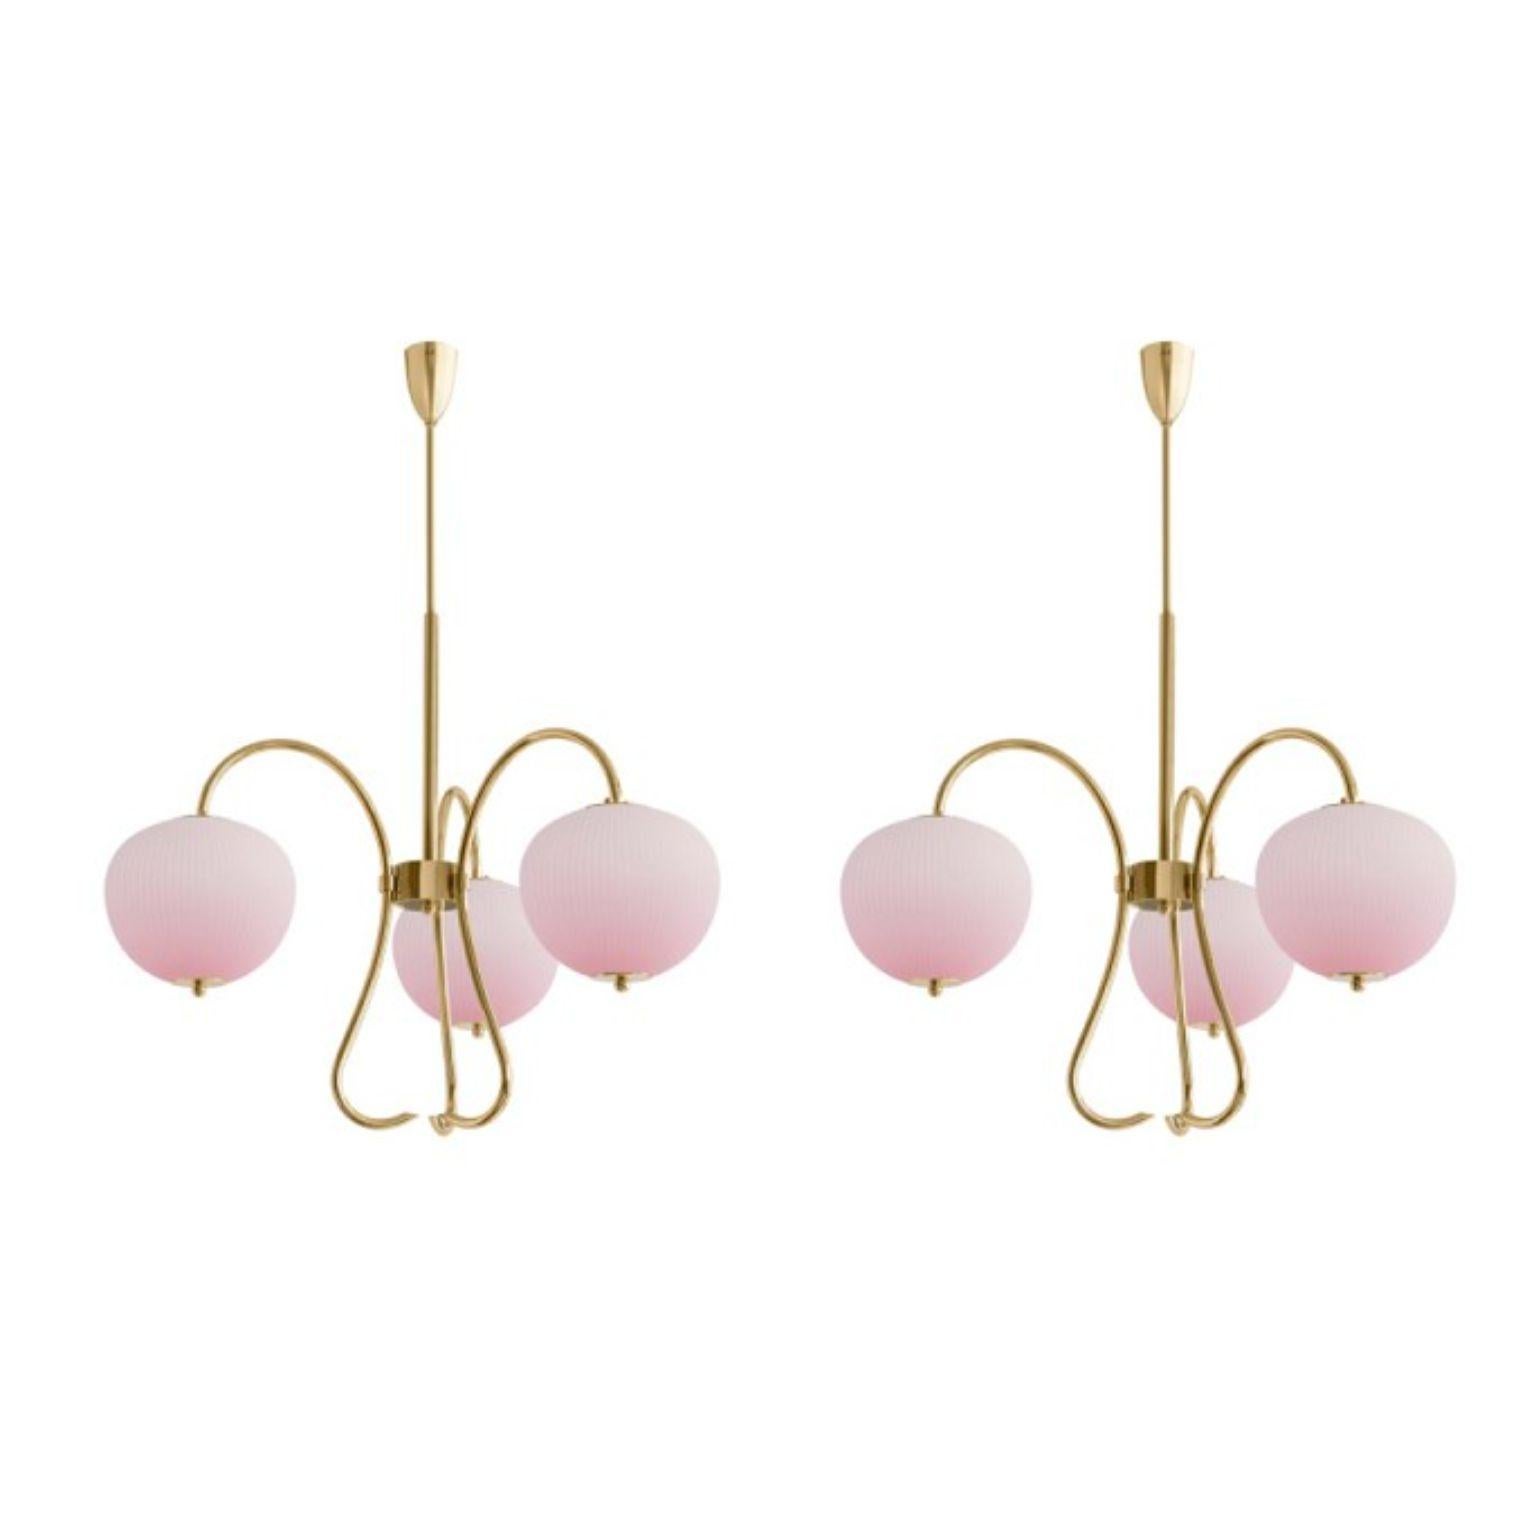 Triple chandelier China 03 by Magic Circus Editions
Dimensions: H 120 x W 81.5 x D 26.2 cm
Materials: Brass, mouth blown glass sculpted with a diamond saw
Colour: soft rose

Available finishes: Brass, nickel
Available colors: enamel soft